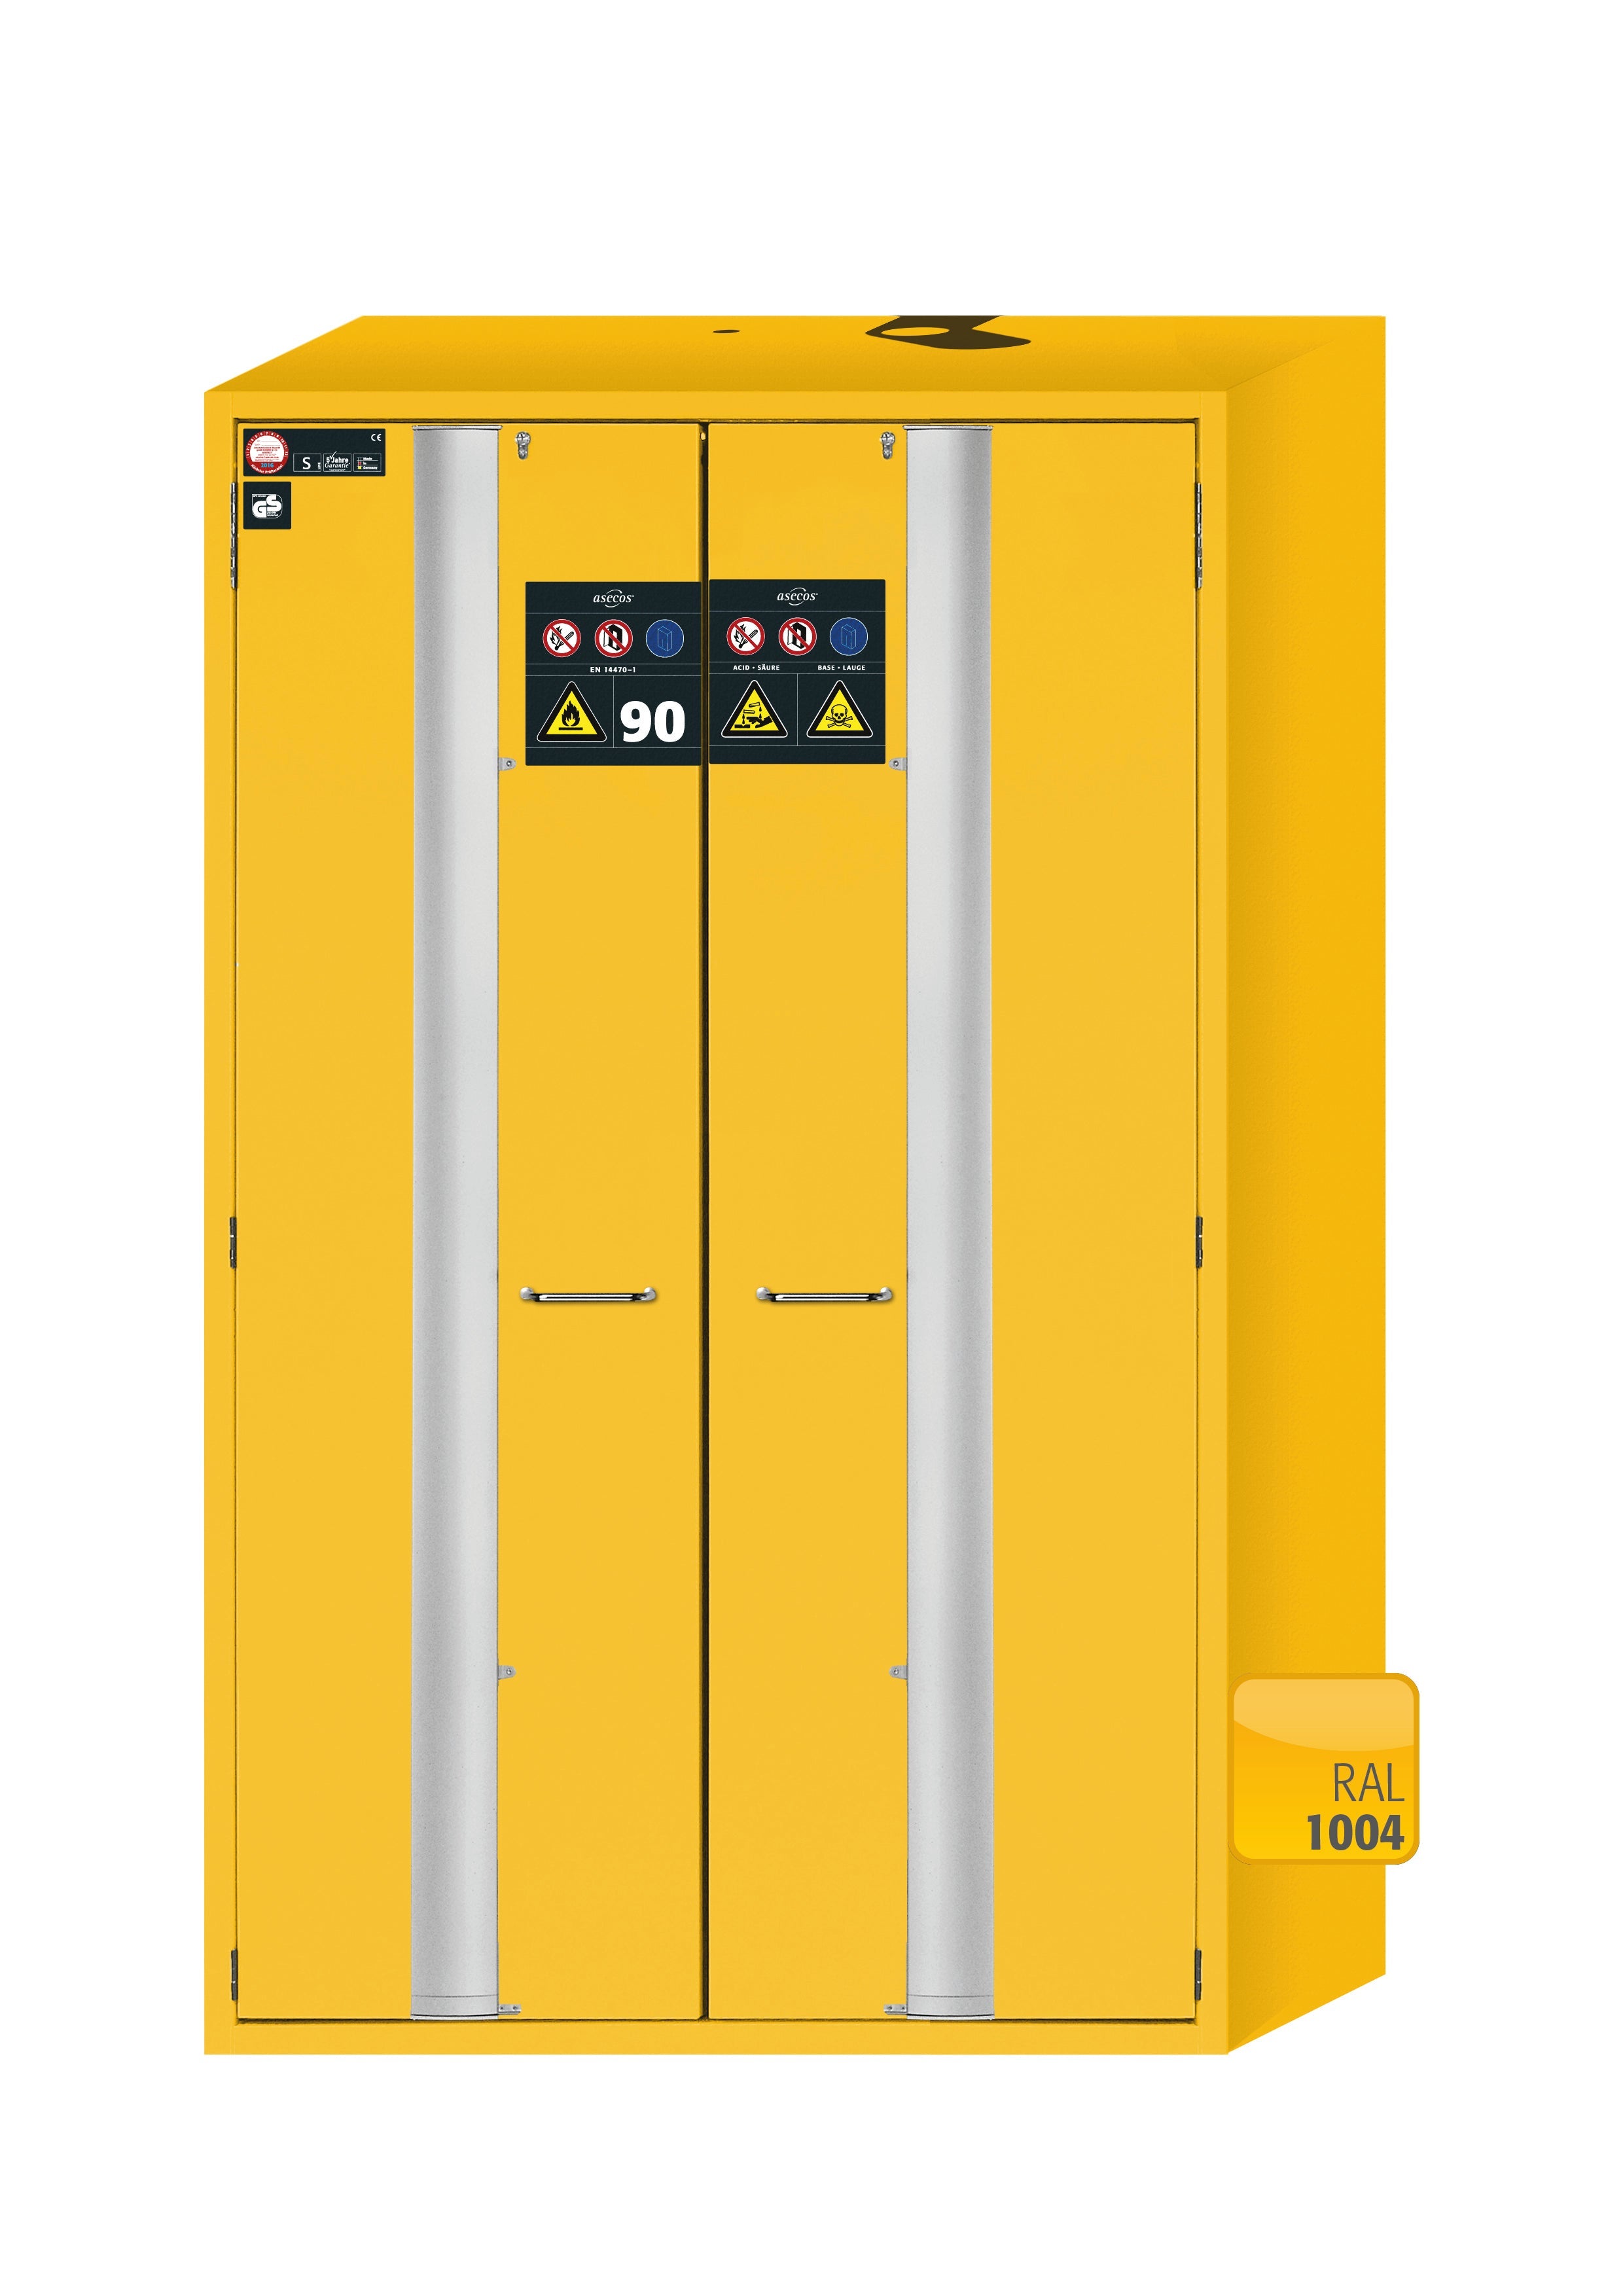 Type 90 safety cabinet S-PHOENIX-90 model S90.196.120.MV.FDAS in safety yellow RAL 1004 with 6x standard shelves (sheet steel)